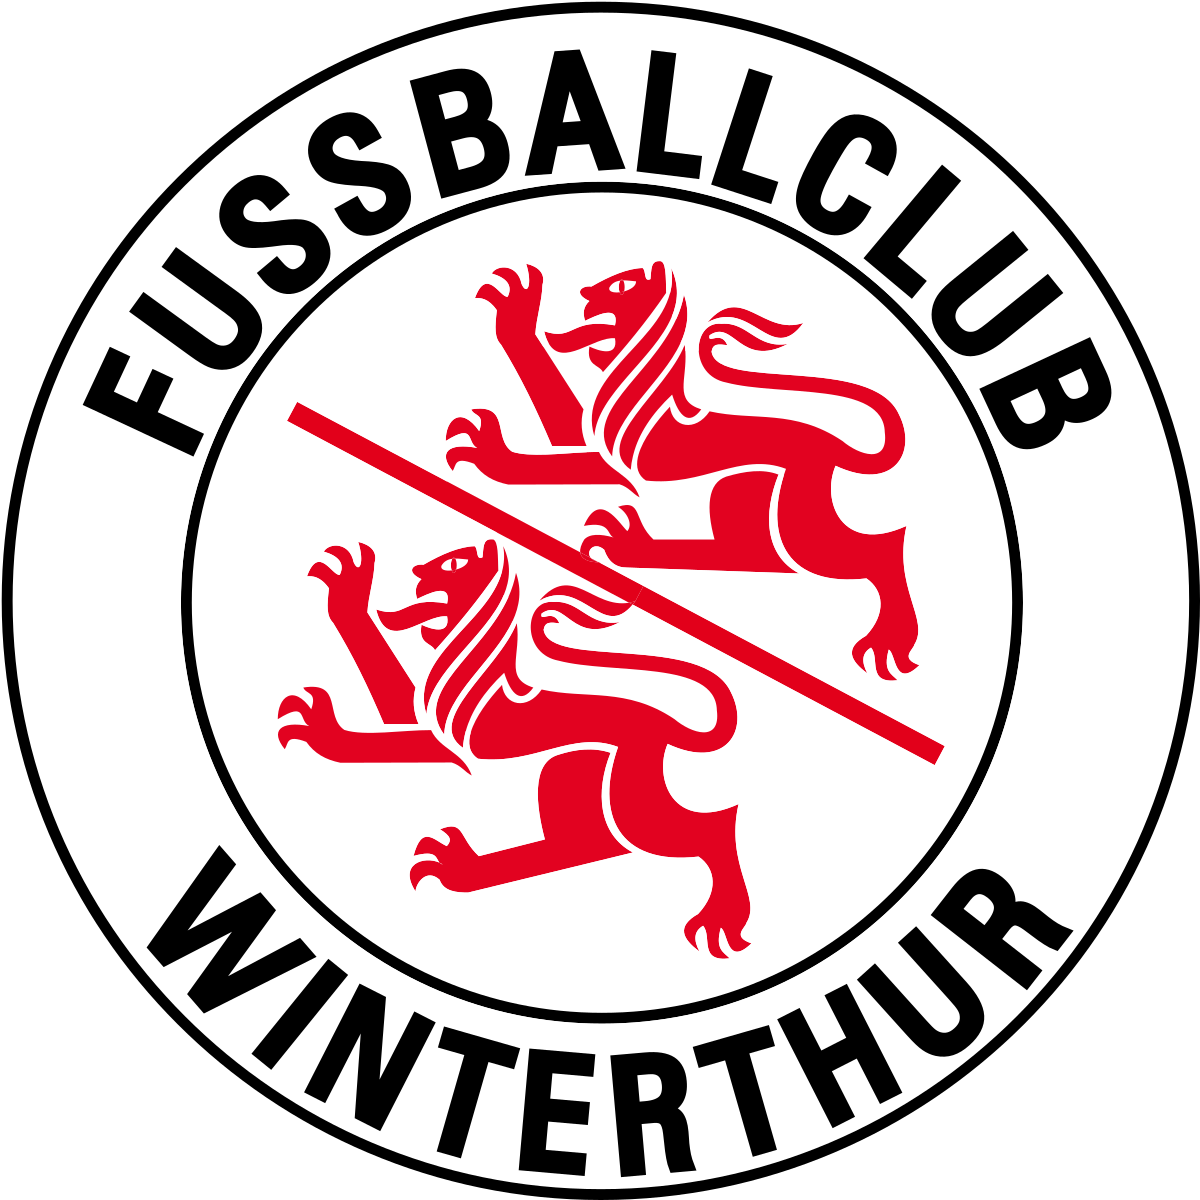 Winterthur vs Young Boys Prediction: Visitors get close to clinching the league title